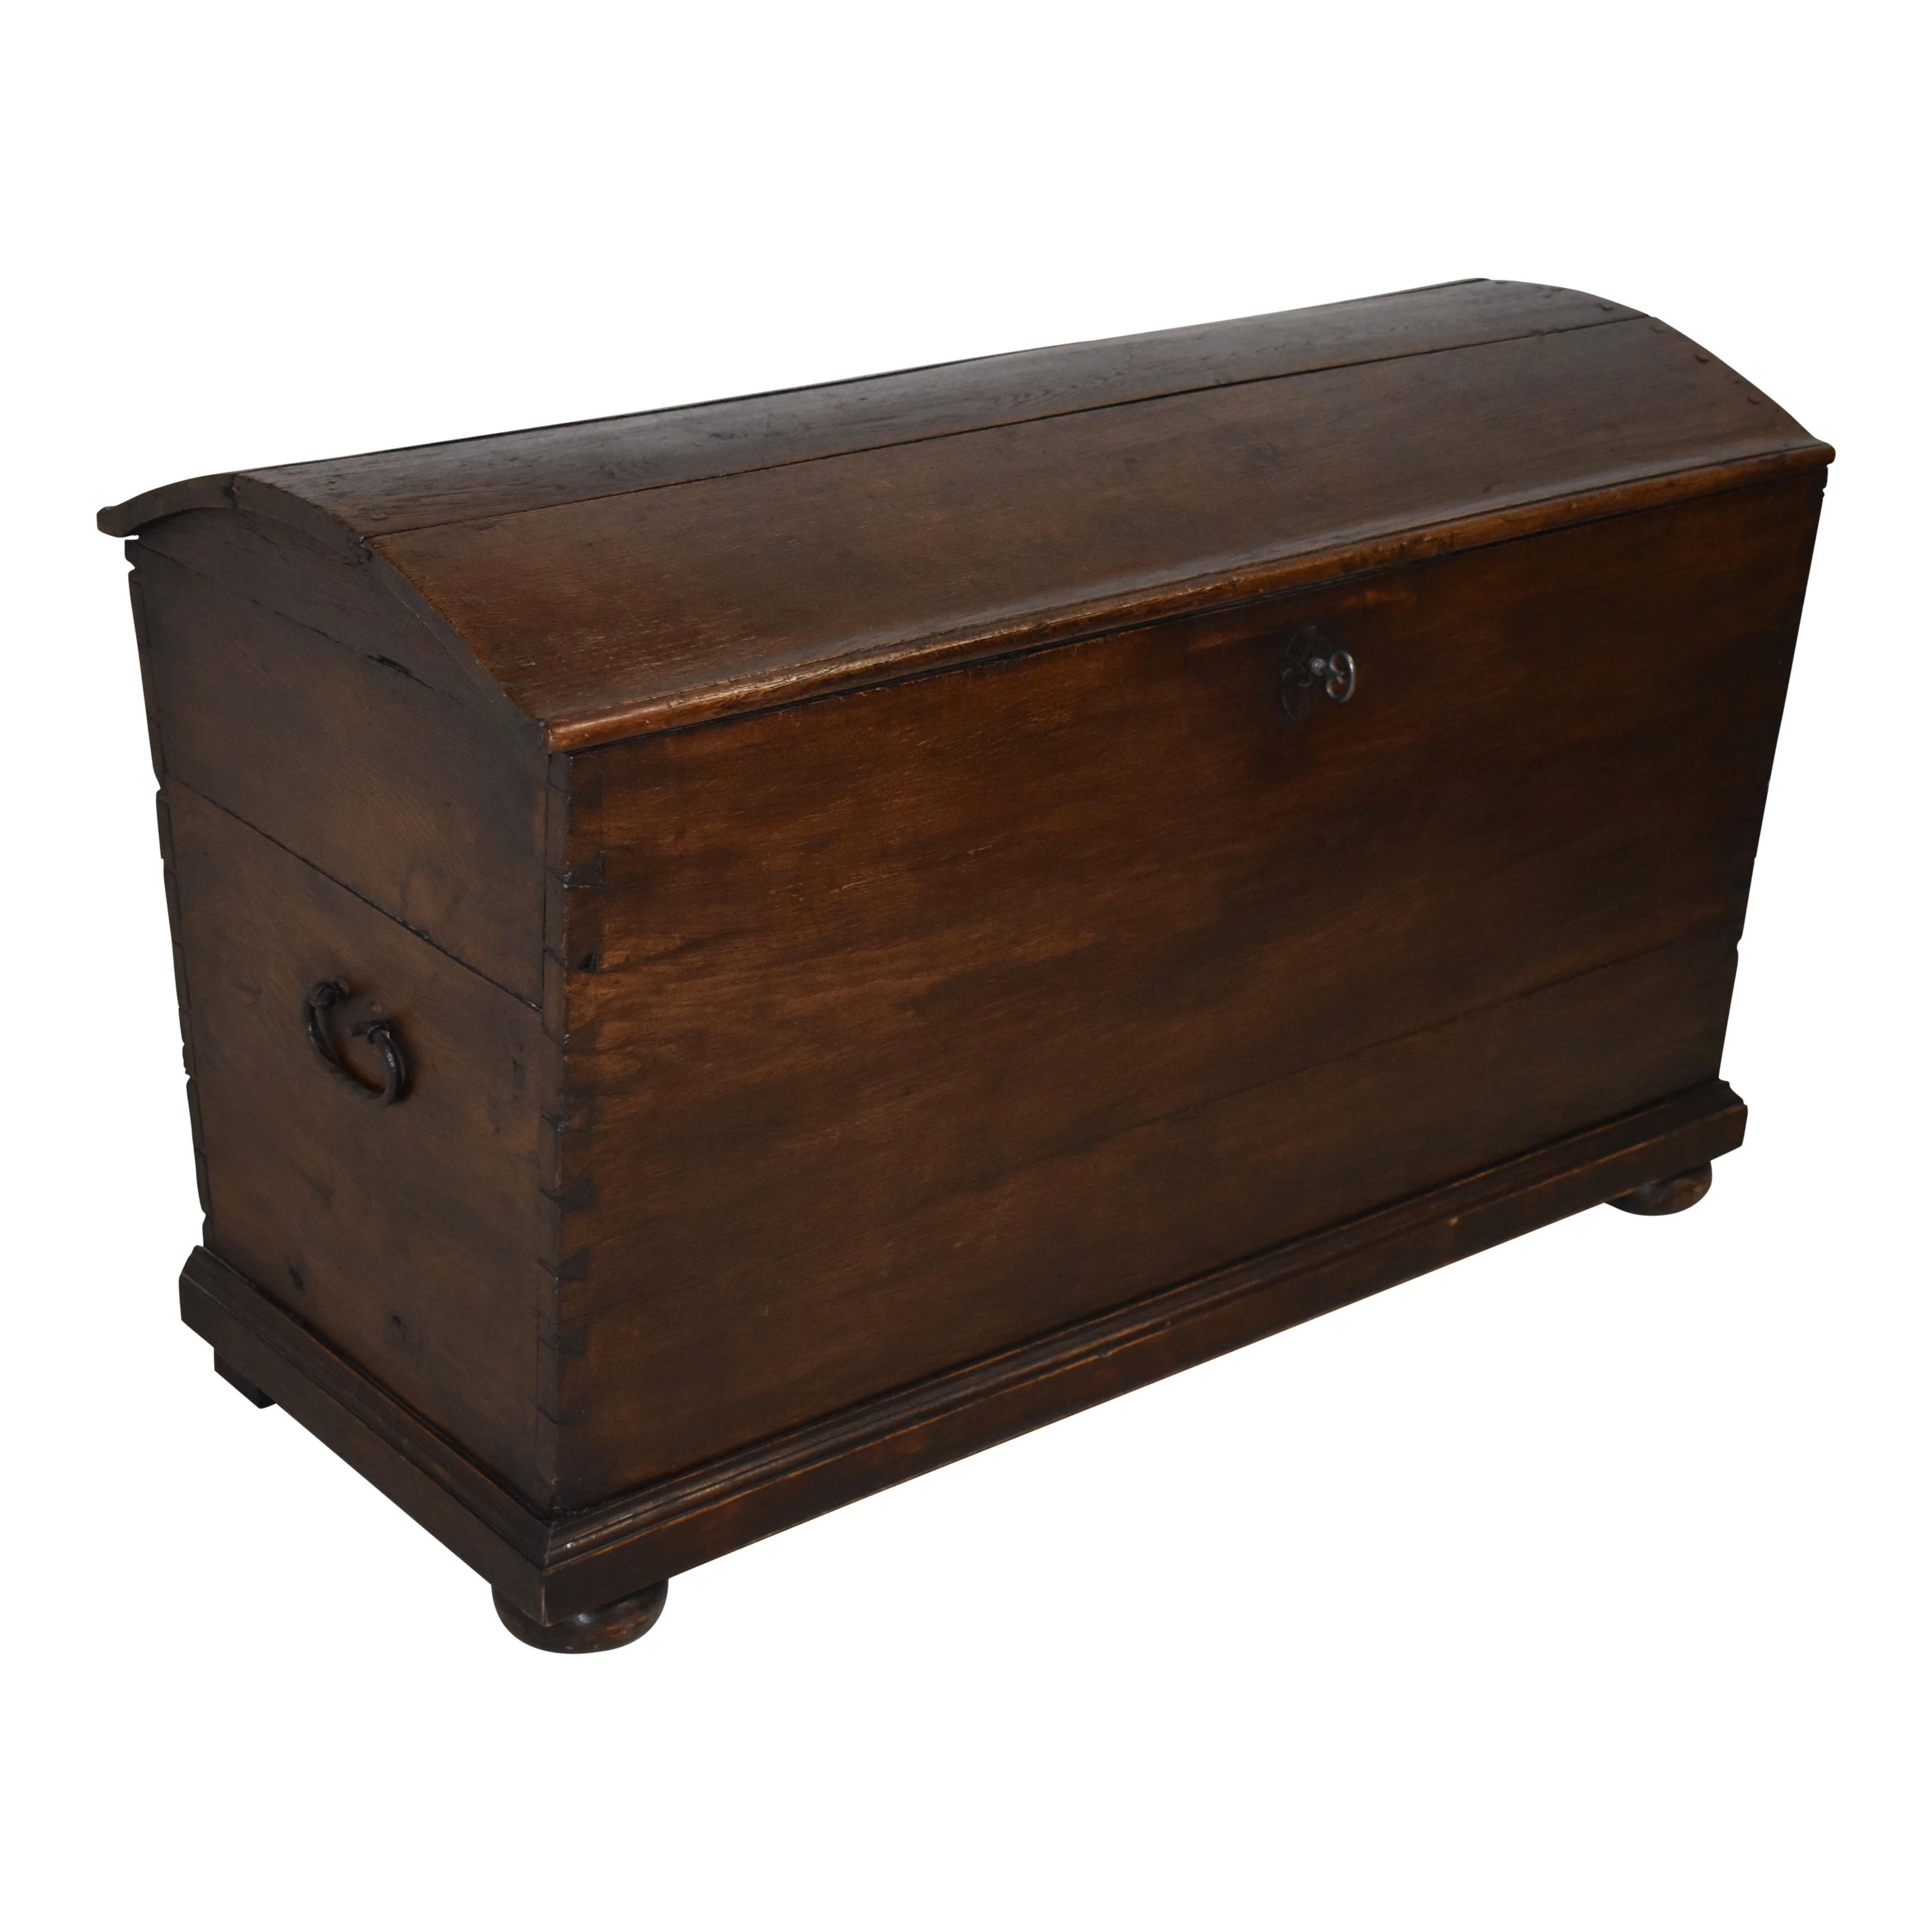 This dome-top, oak trunk from the mid-19th century features generous storage and a distinctive grain pattern that is not lost in the dark stain finish. Dovetail joinery at the corners and hand forged iron handles are evidence of the Fine